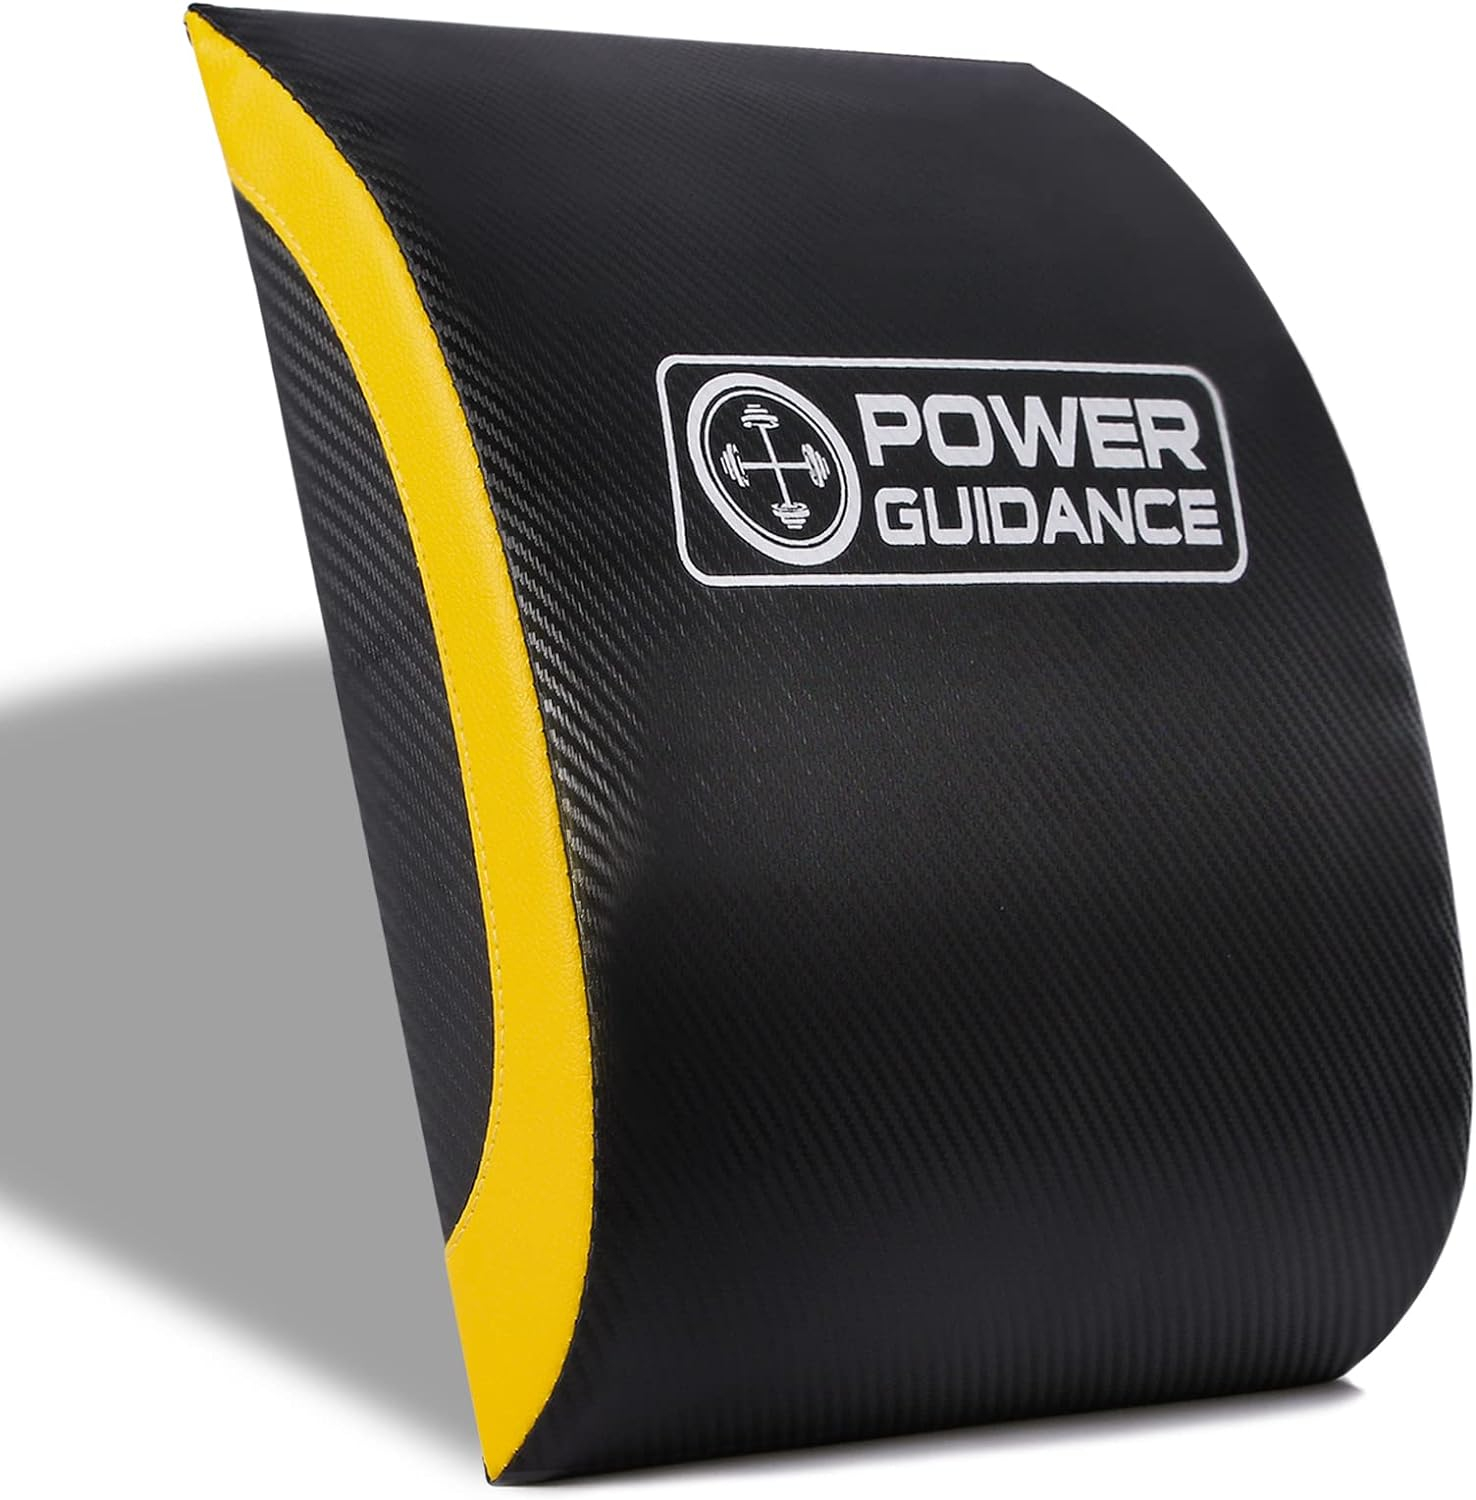 POWER GUIDANCE Ab Exercise Mat - Sit Up Pad - Abdominal  Core Trainer Mat for Full Range of Motion Ab Workouts